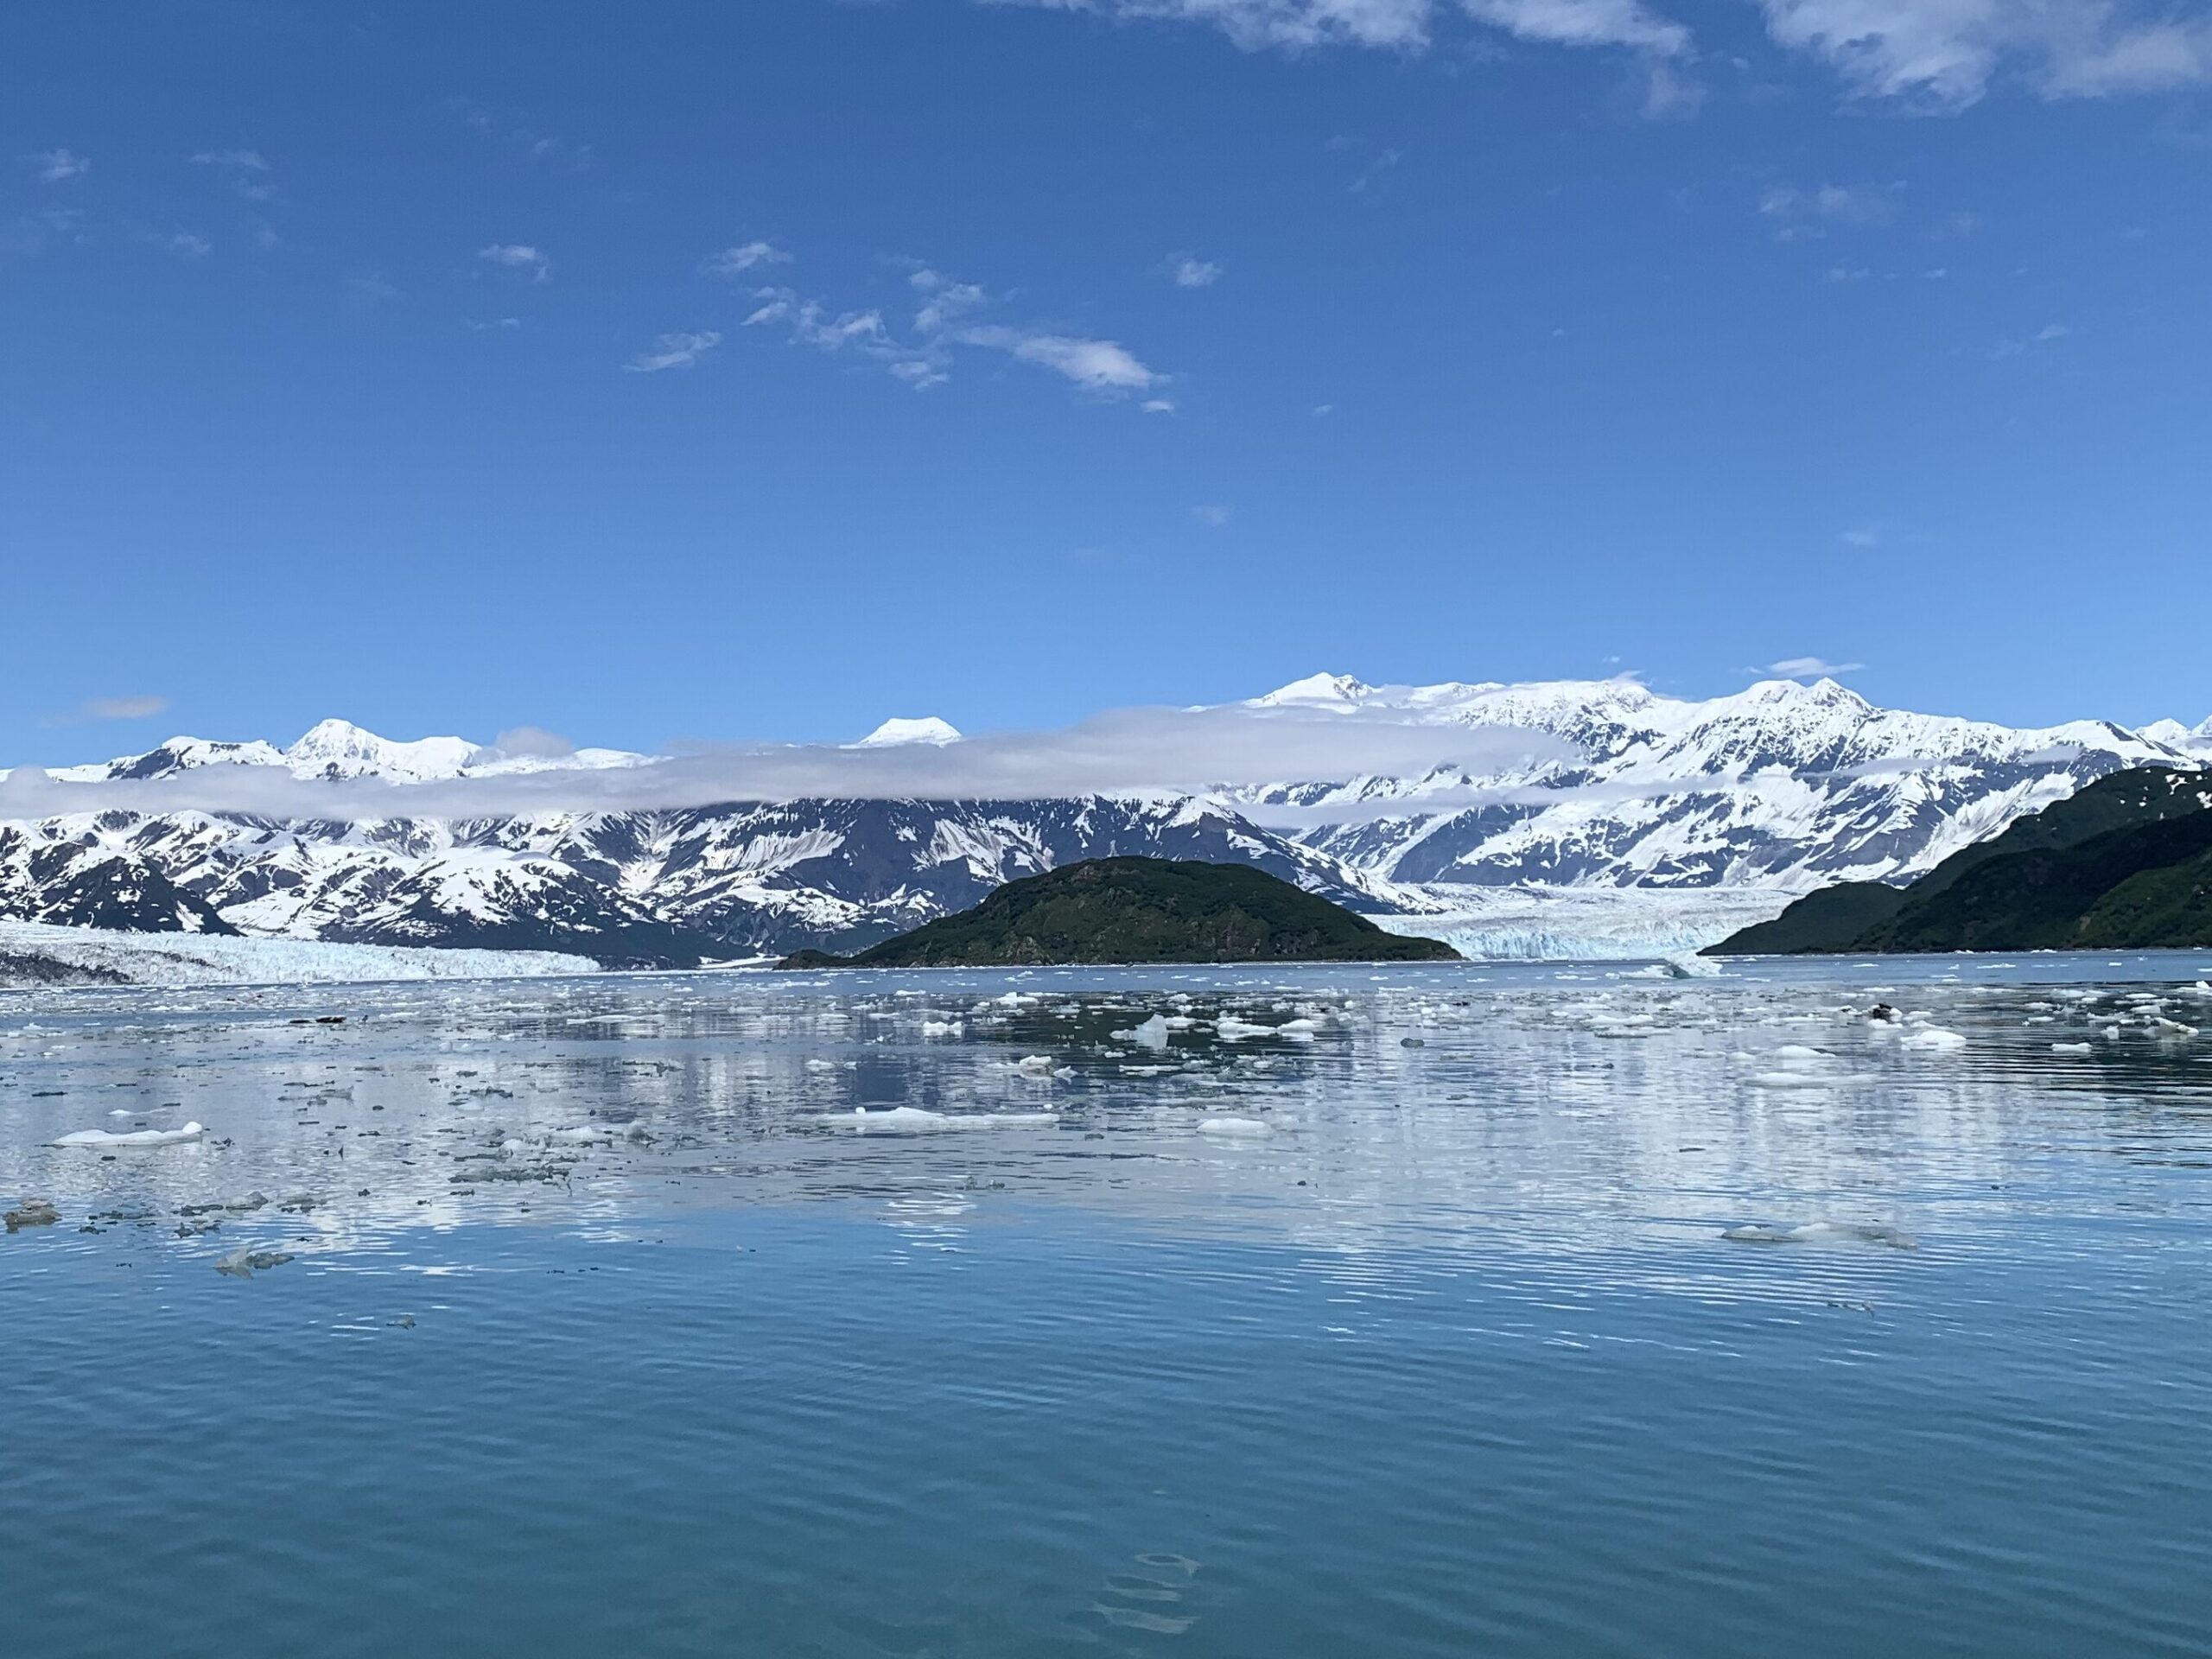 Blue skies reflected on a glacial fjord. The glacier and ice covered mountains are visible in the distance.